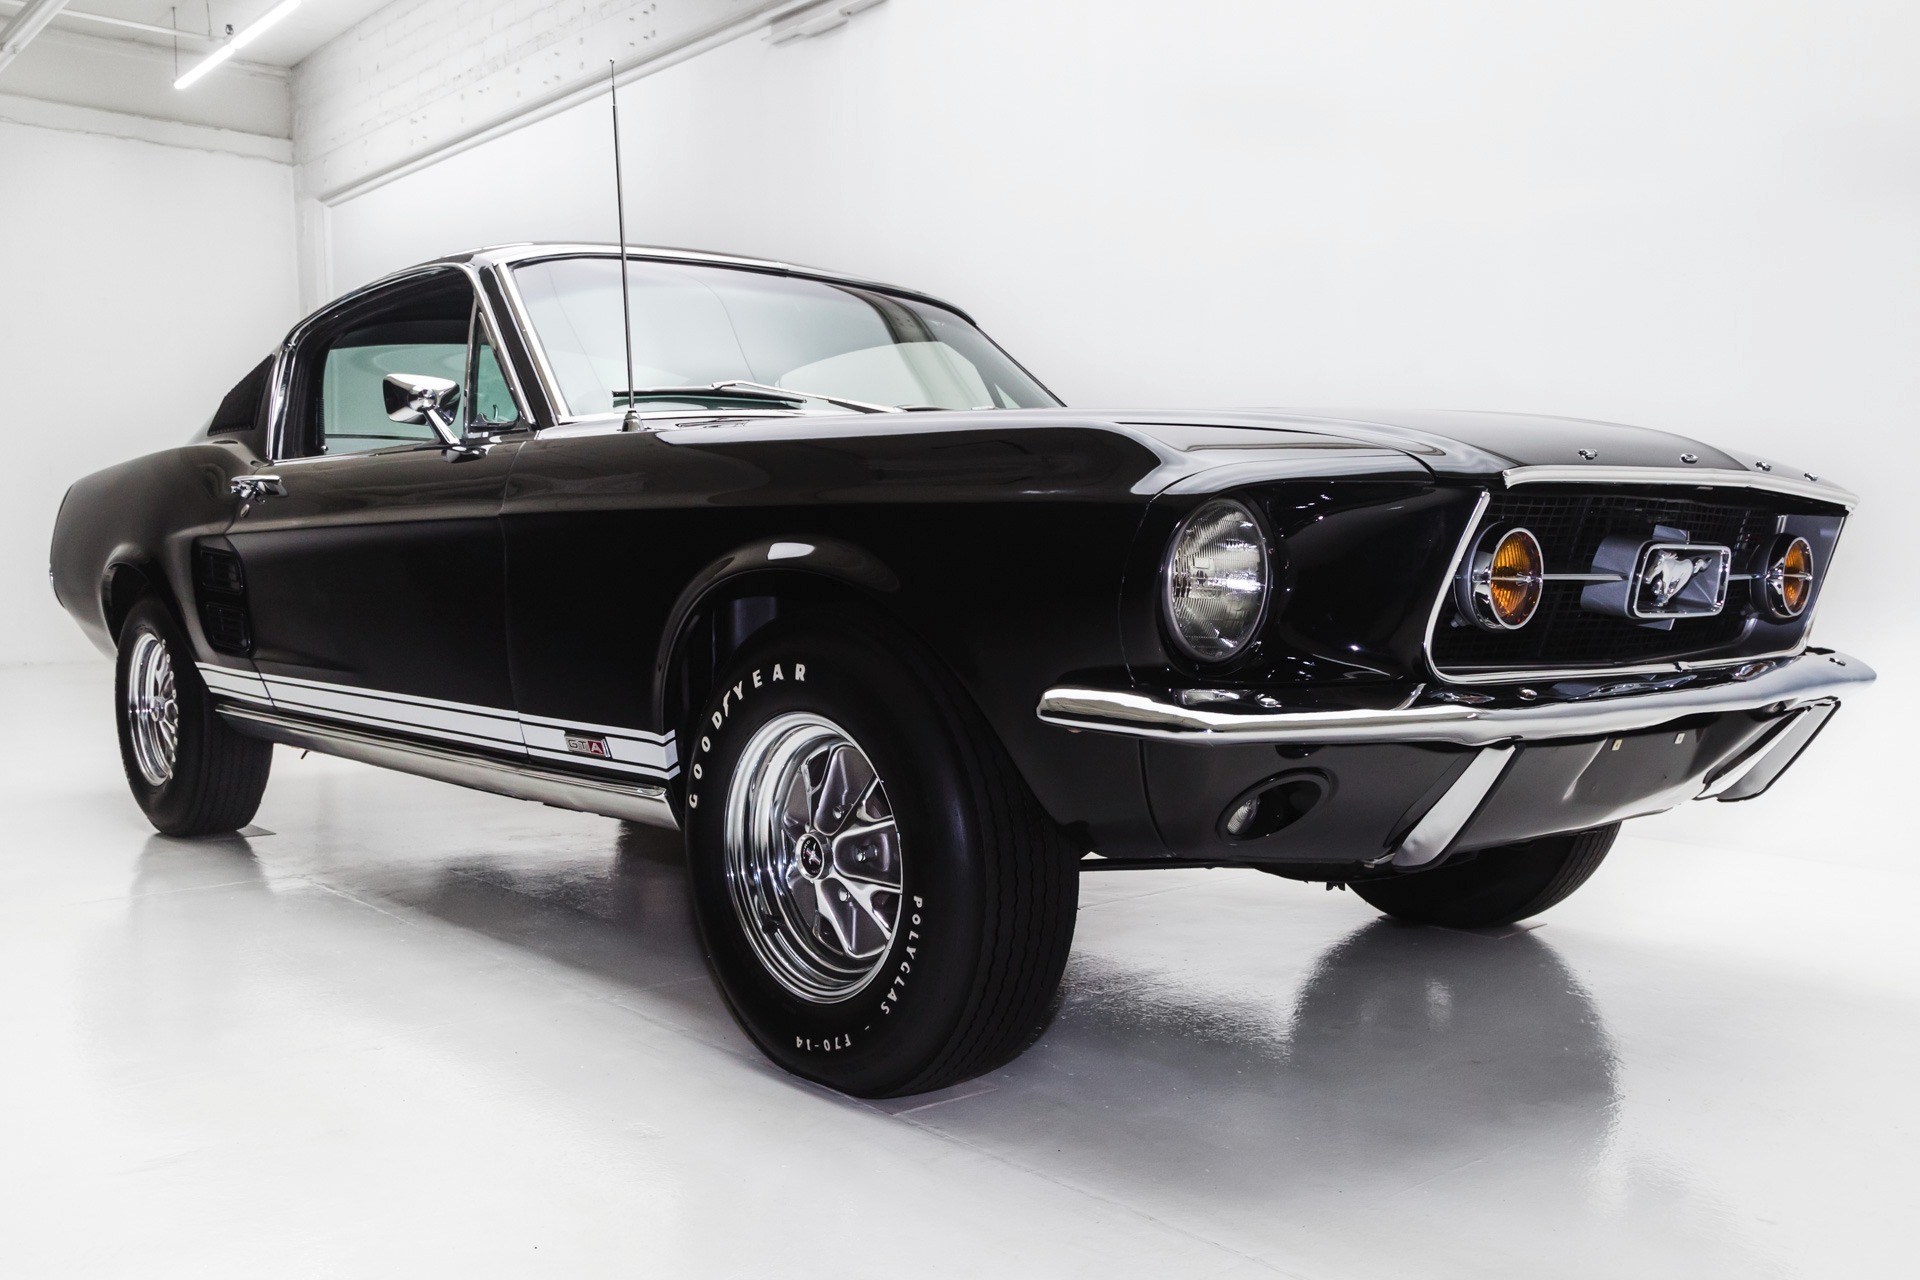 a 1967 Ford Mustang Fastback